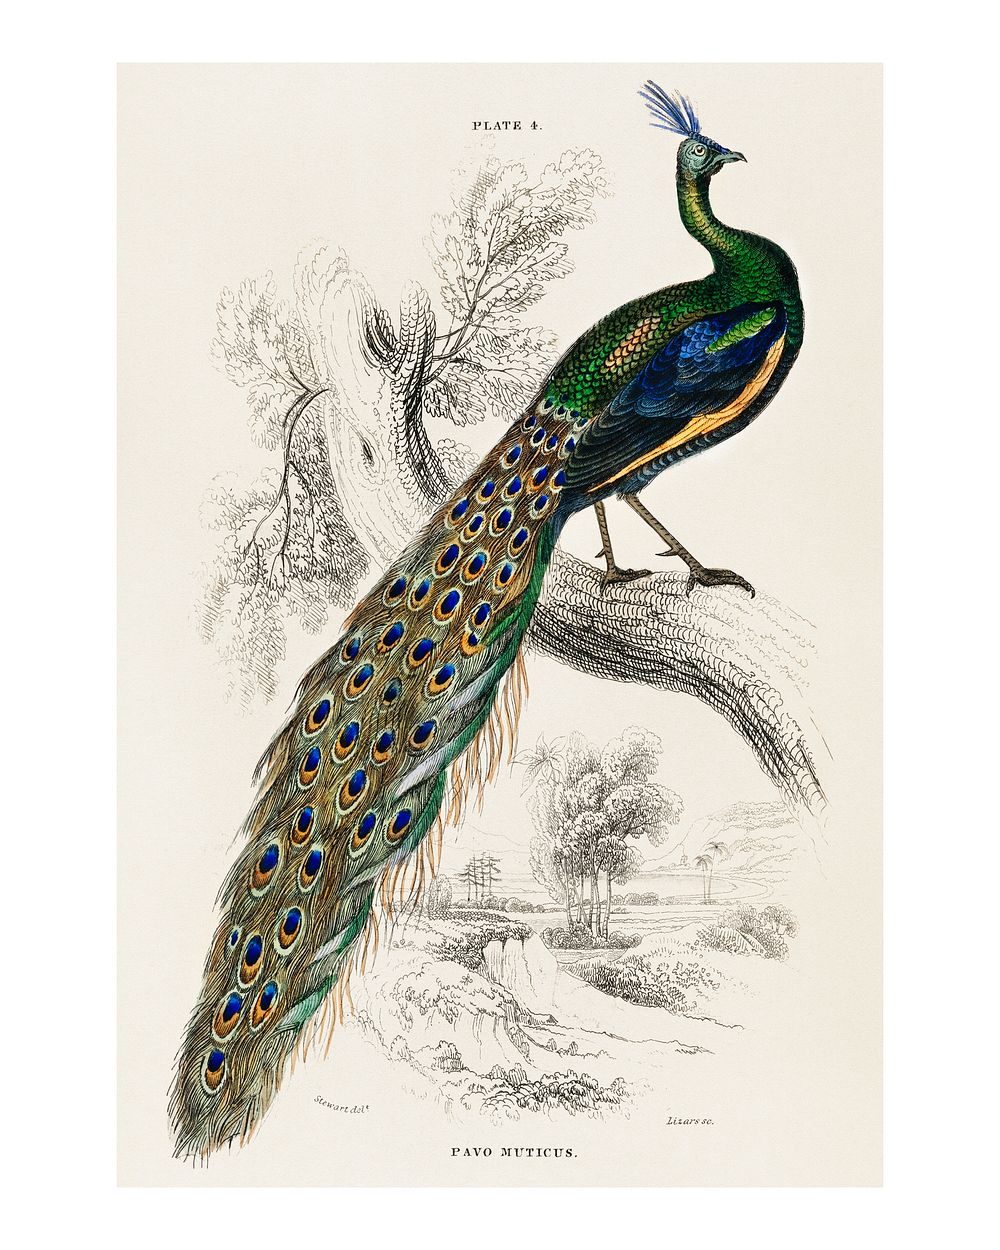 Majestic male peafowl vintage illustration wall art print and poster design remix from original artwork.